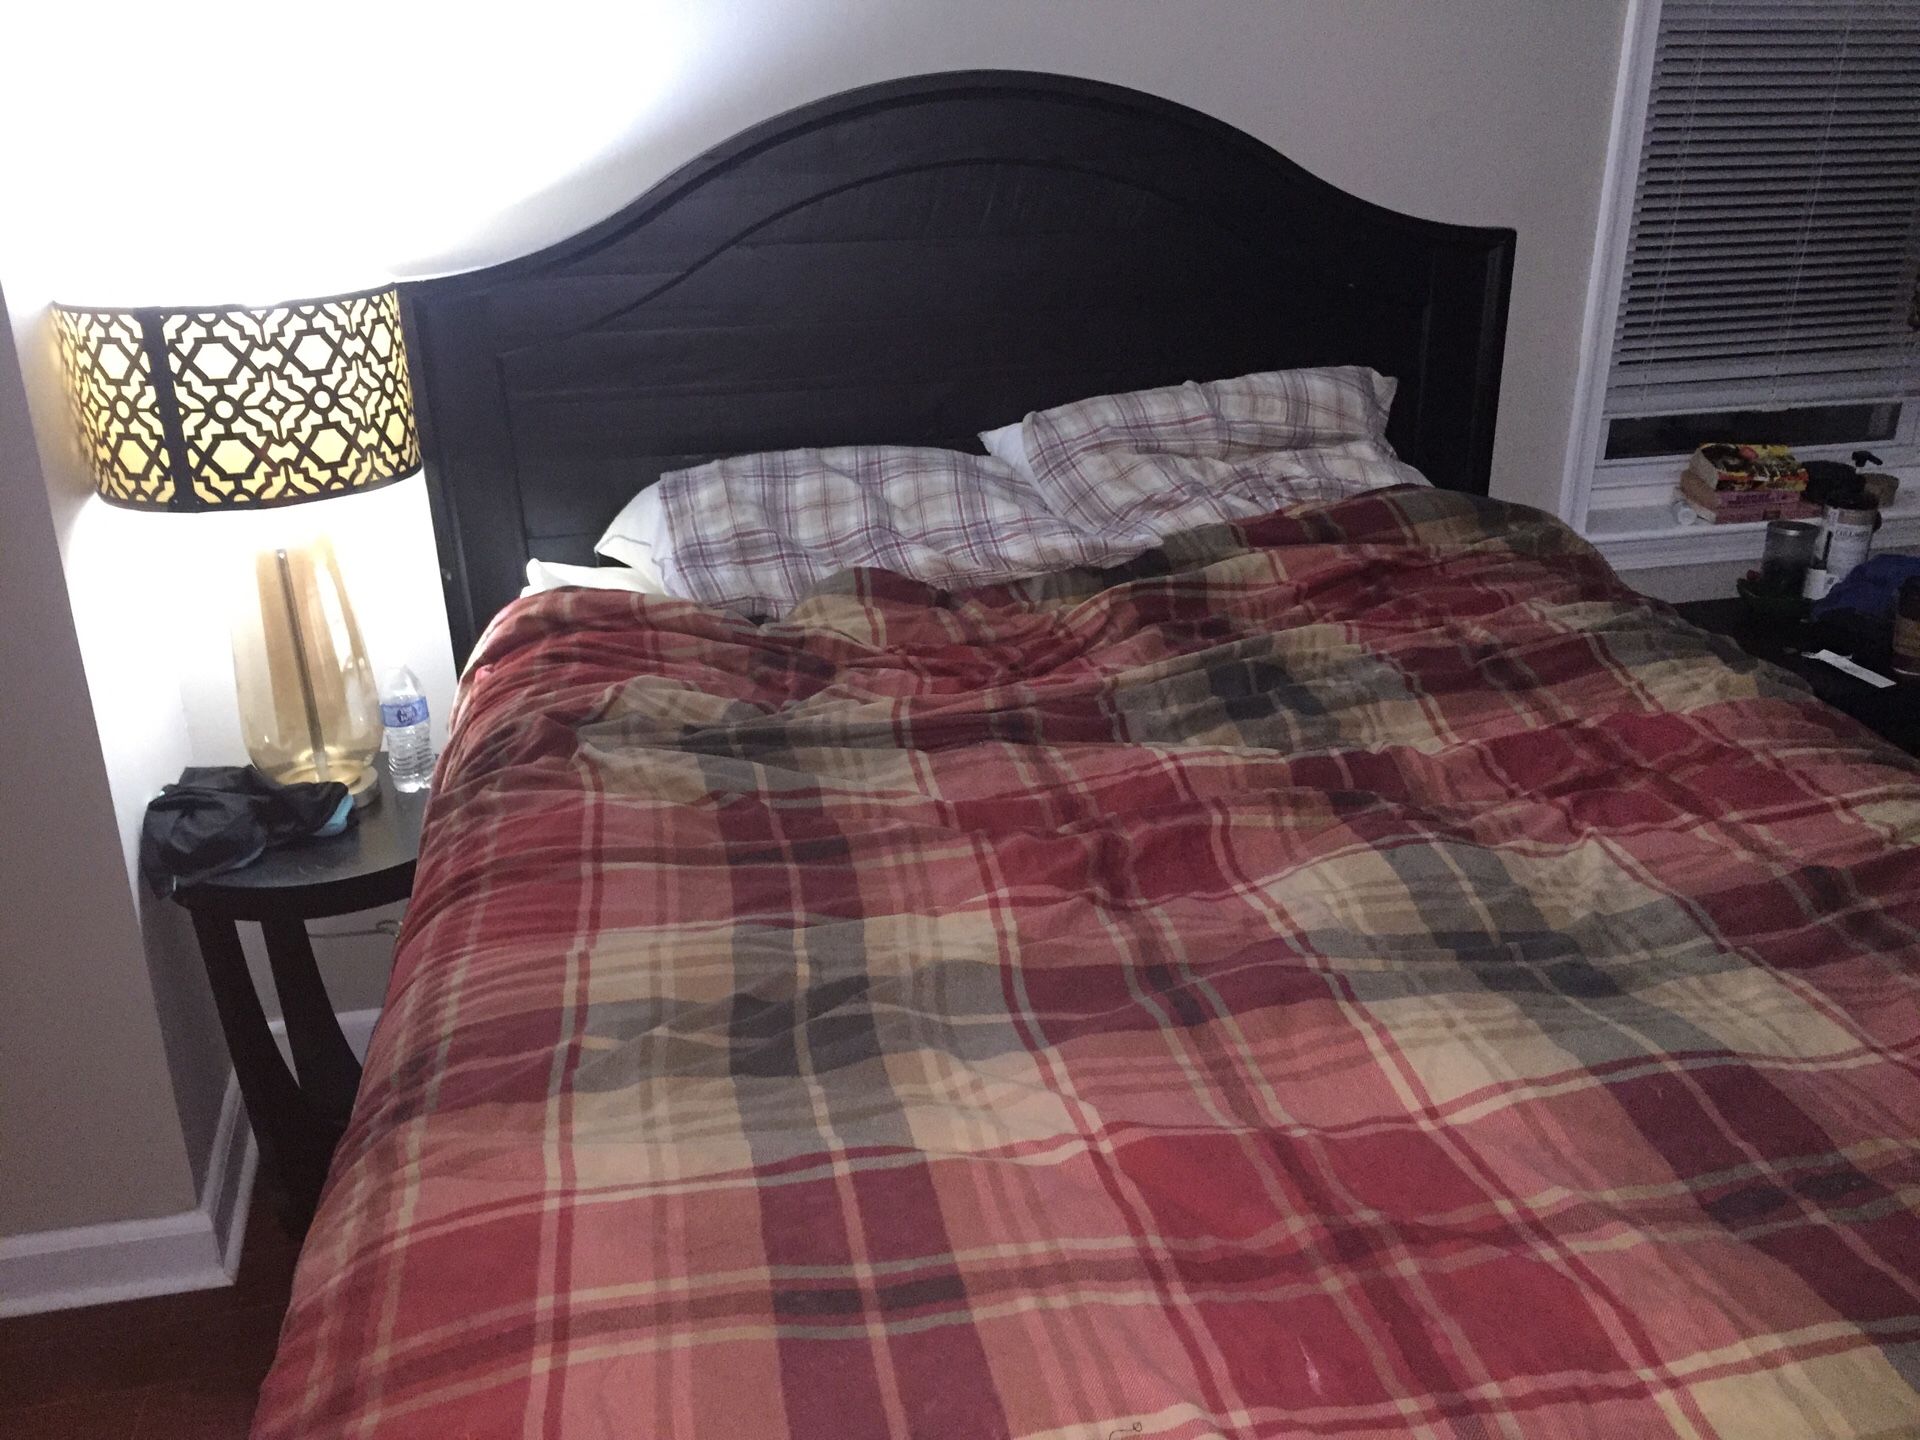 Queen bedroom set with mattress and more